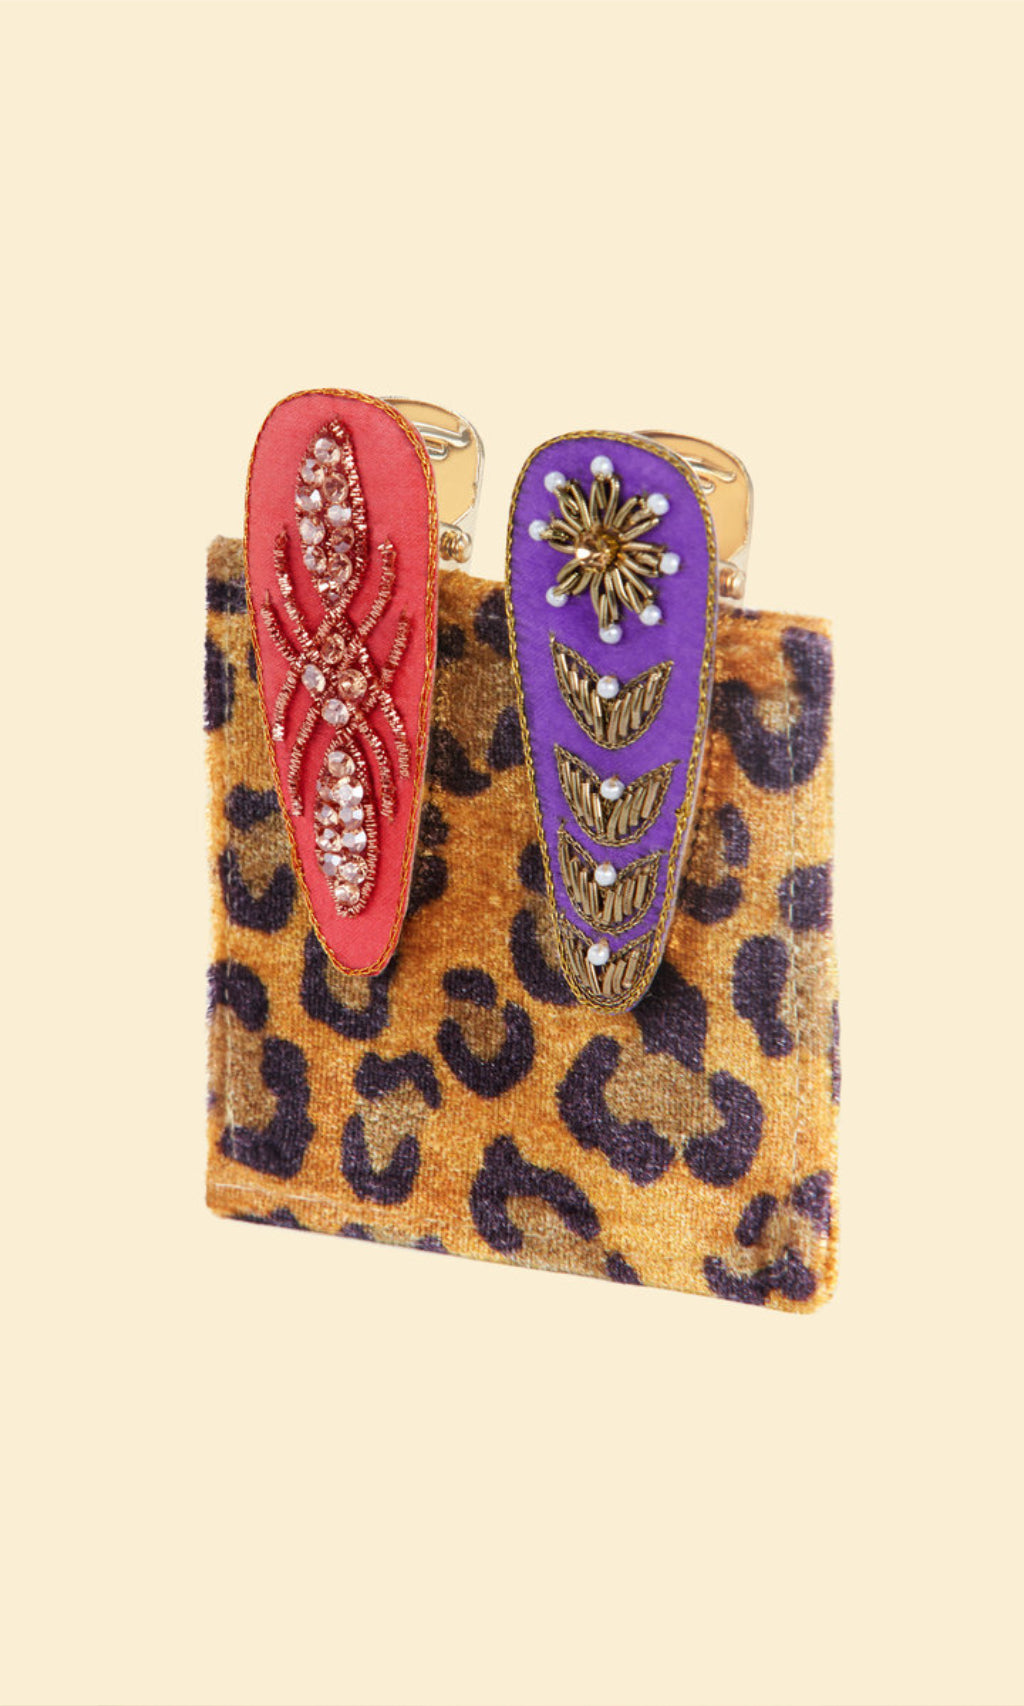 Jewelled Hair Clips (Set of 2) - Flower and Deco Tile